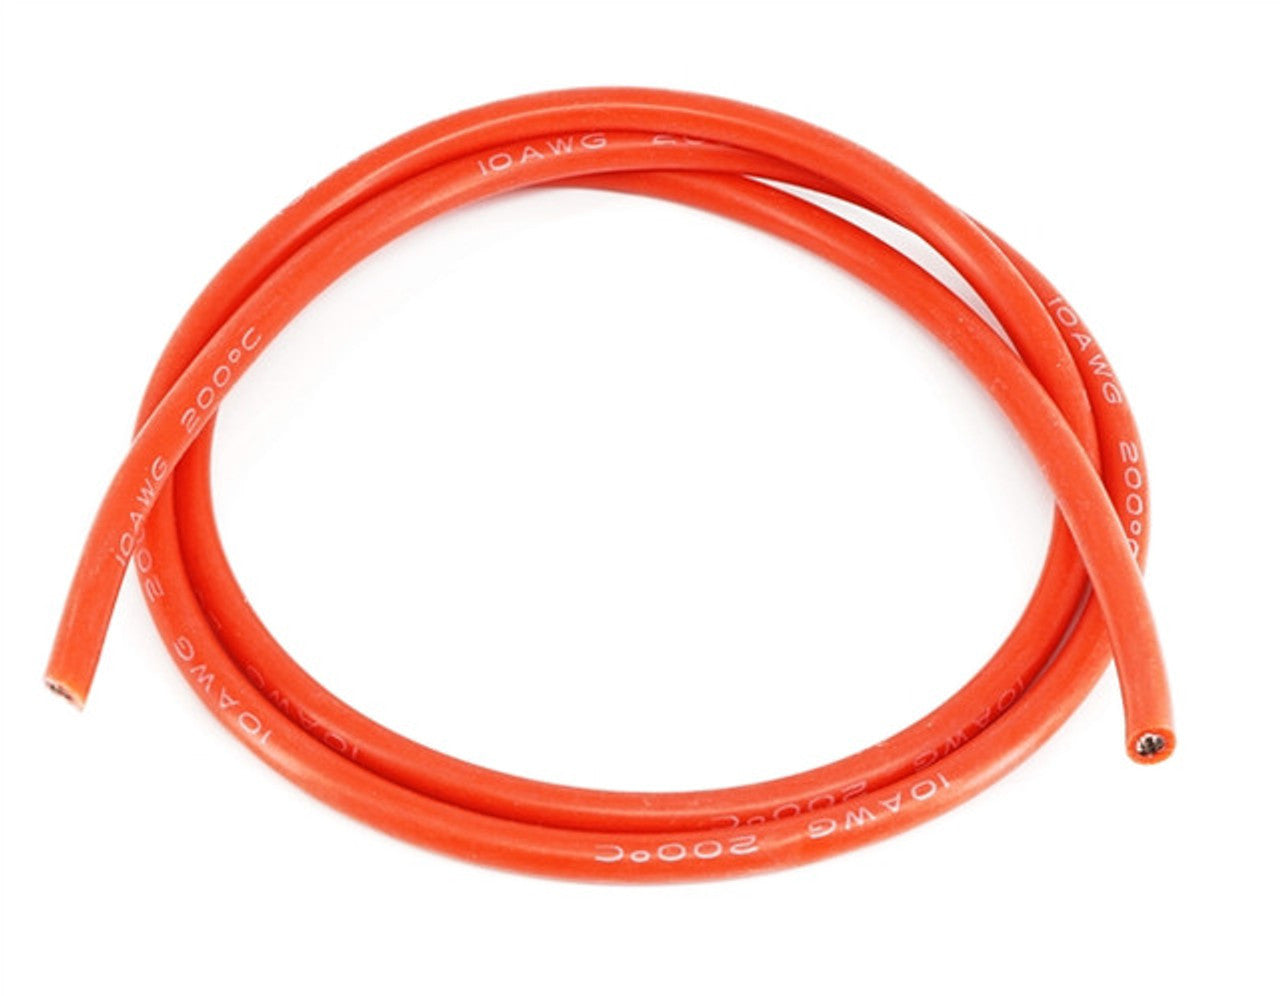 10 awg Silicone Wire (1 Meter)